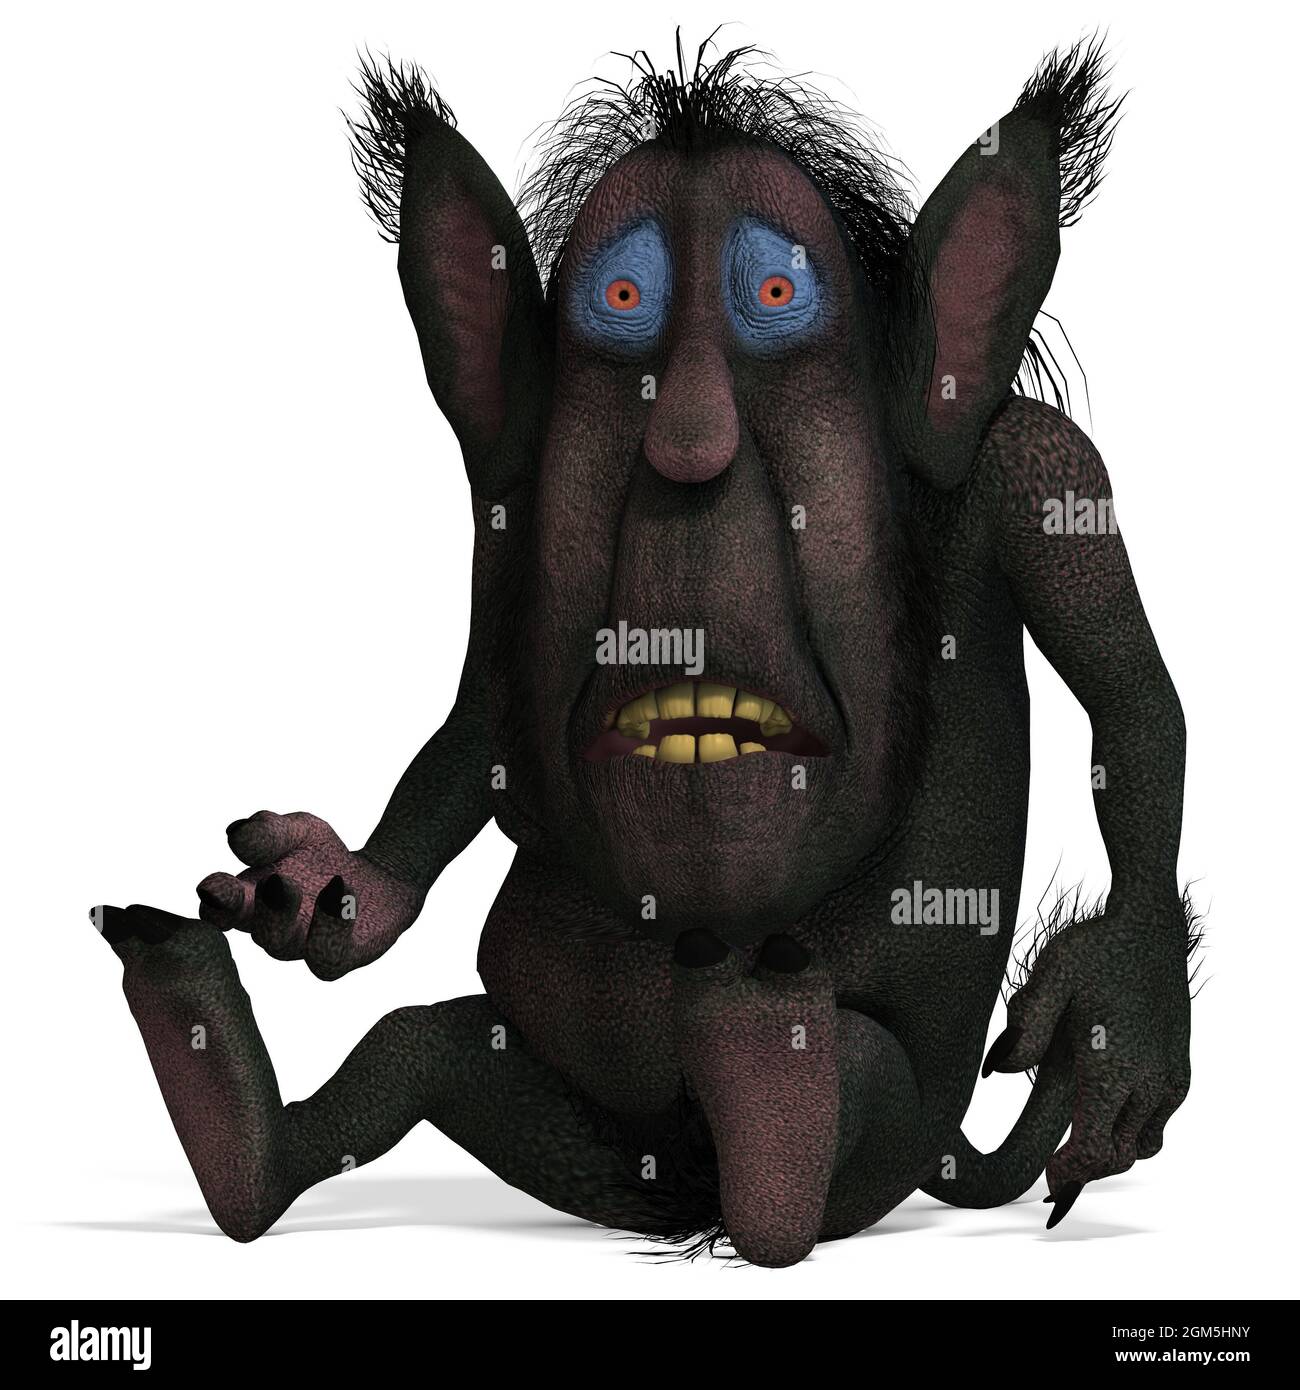 3D-illustration of a cute and asking cartoon troll over white Stock Photo